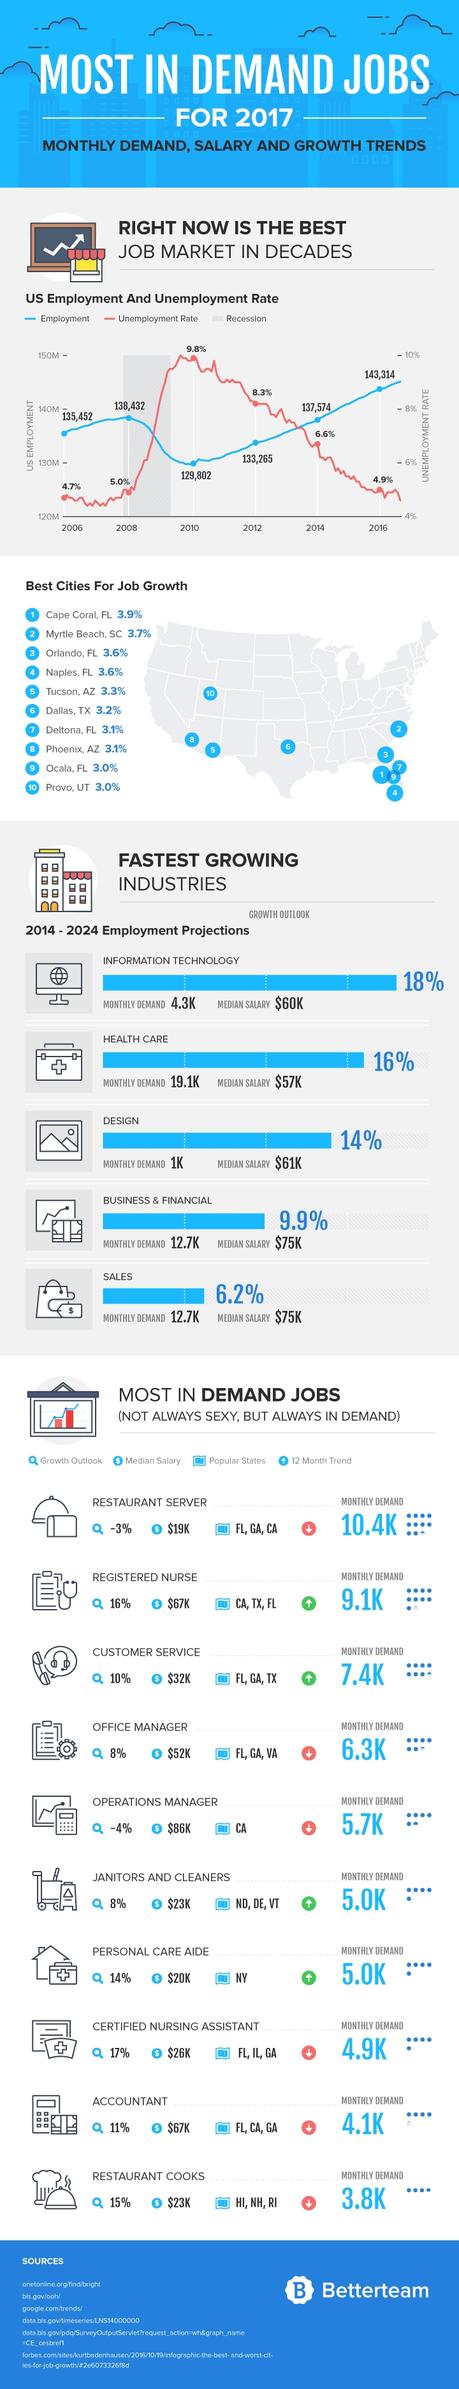 The Most in Demand Jobs for 2017: Monthly Demand, Salary and Growth Trends